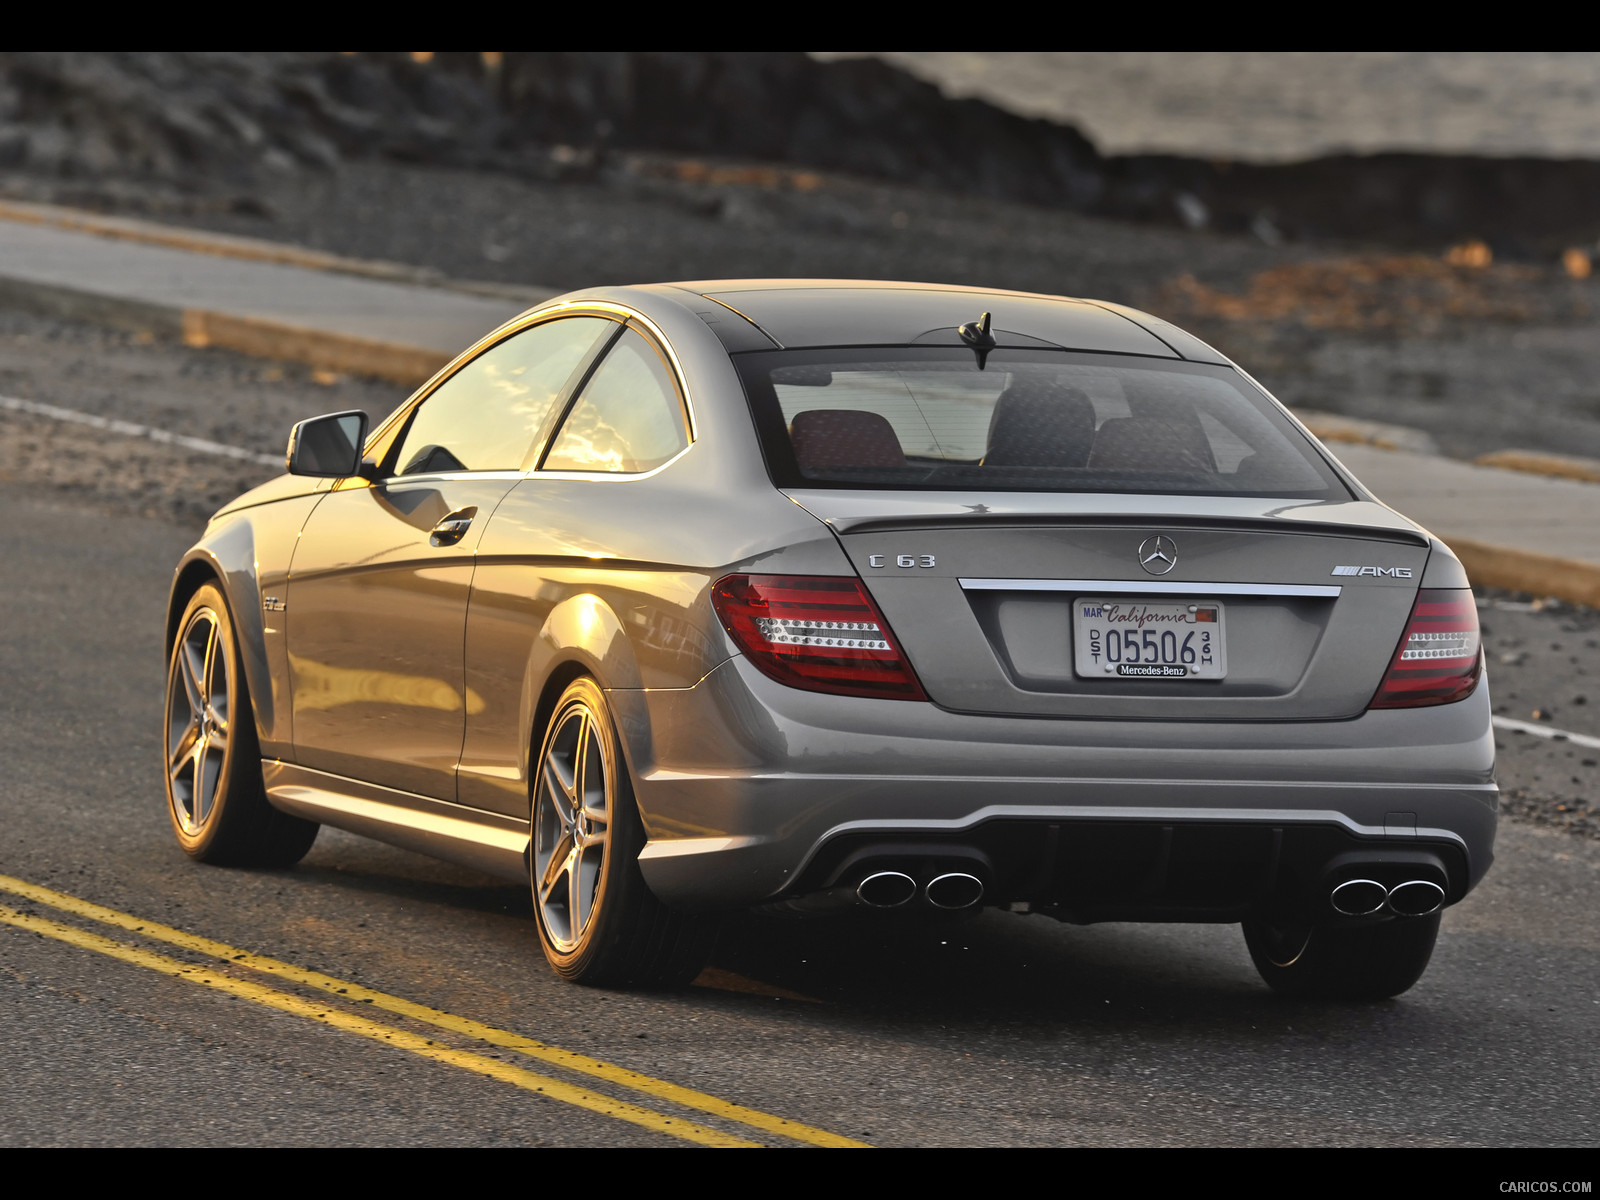 Mercedes-Benz C63 AMG Coupe (2012) with MCT transmission - , #11 of 64